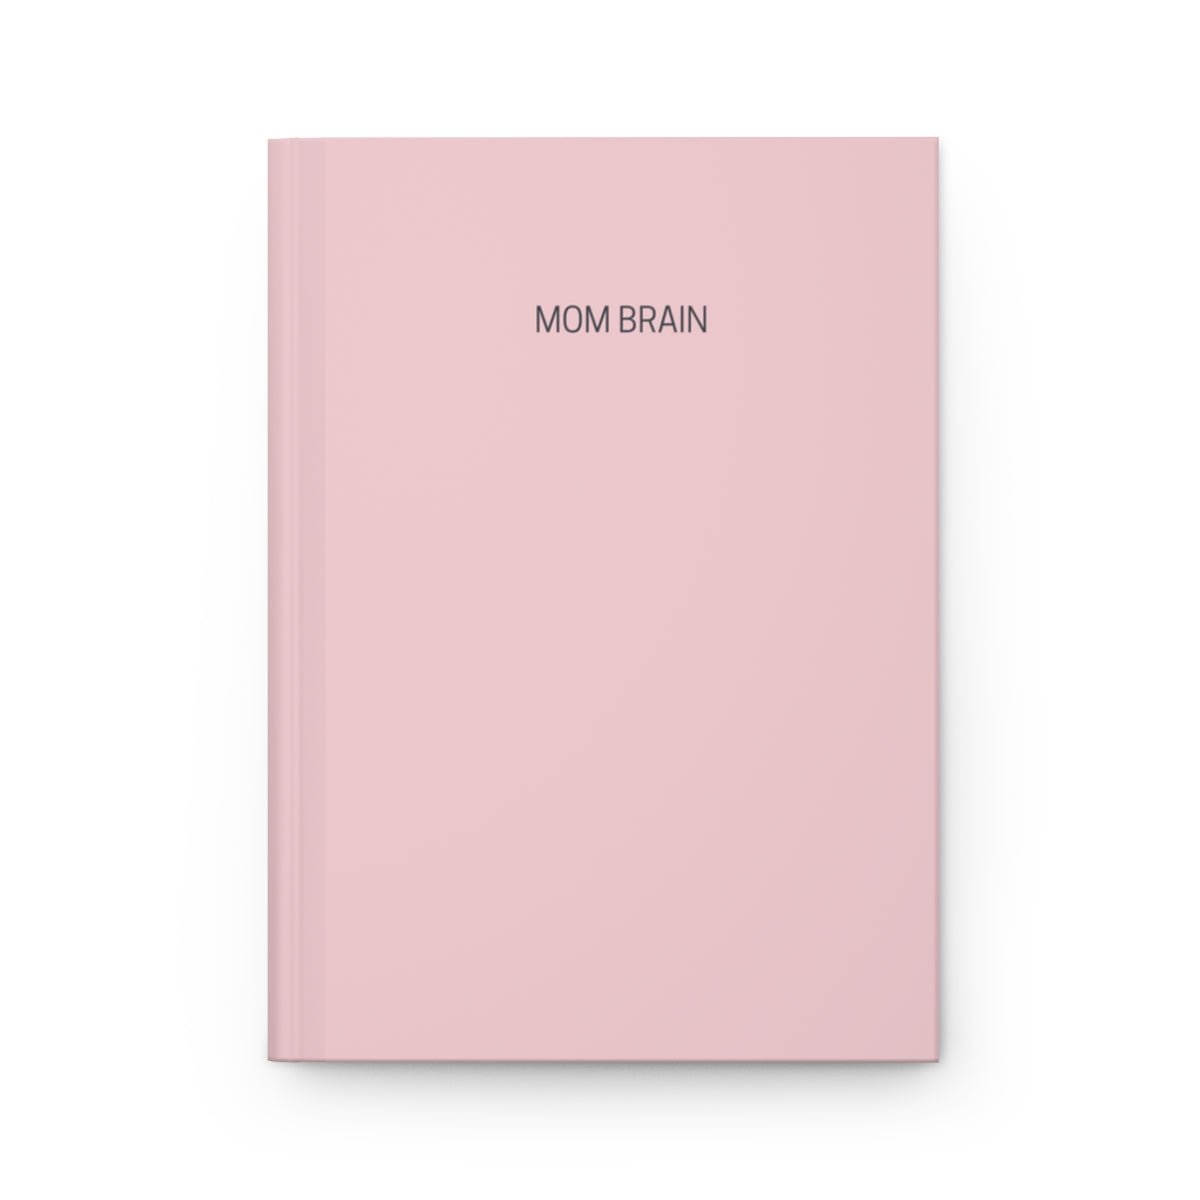 Mom Brain Hardcover Matte Journal - The Kindness Cause